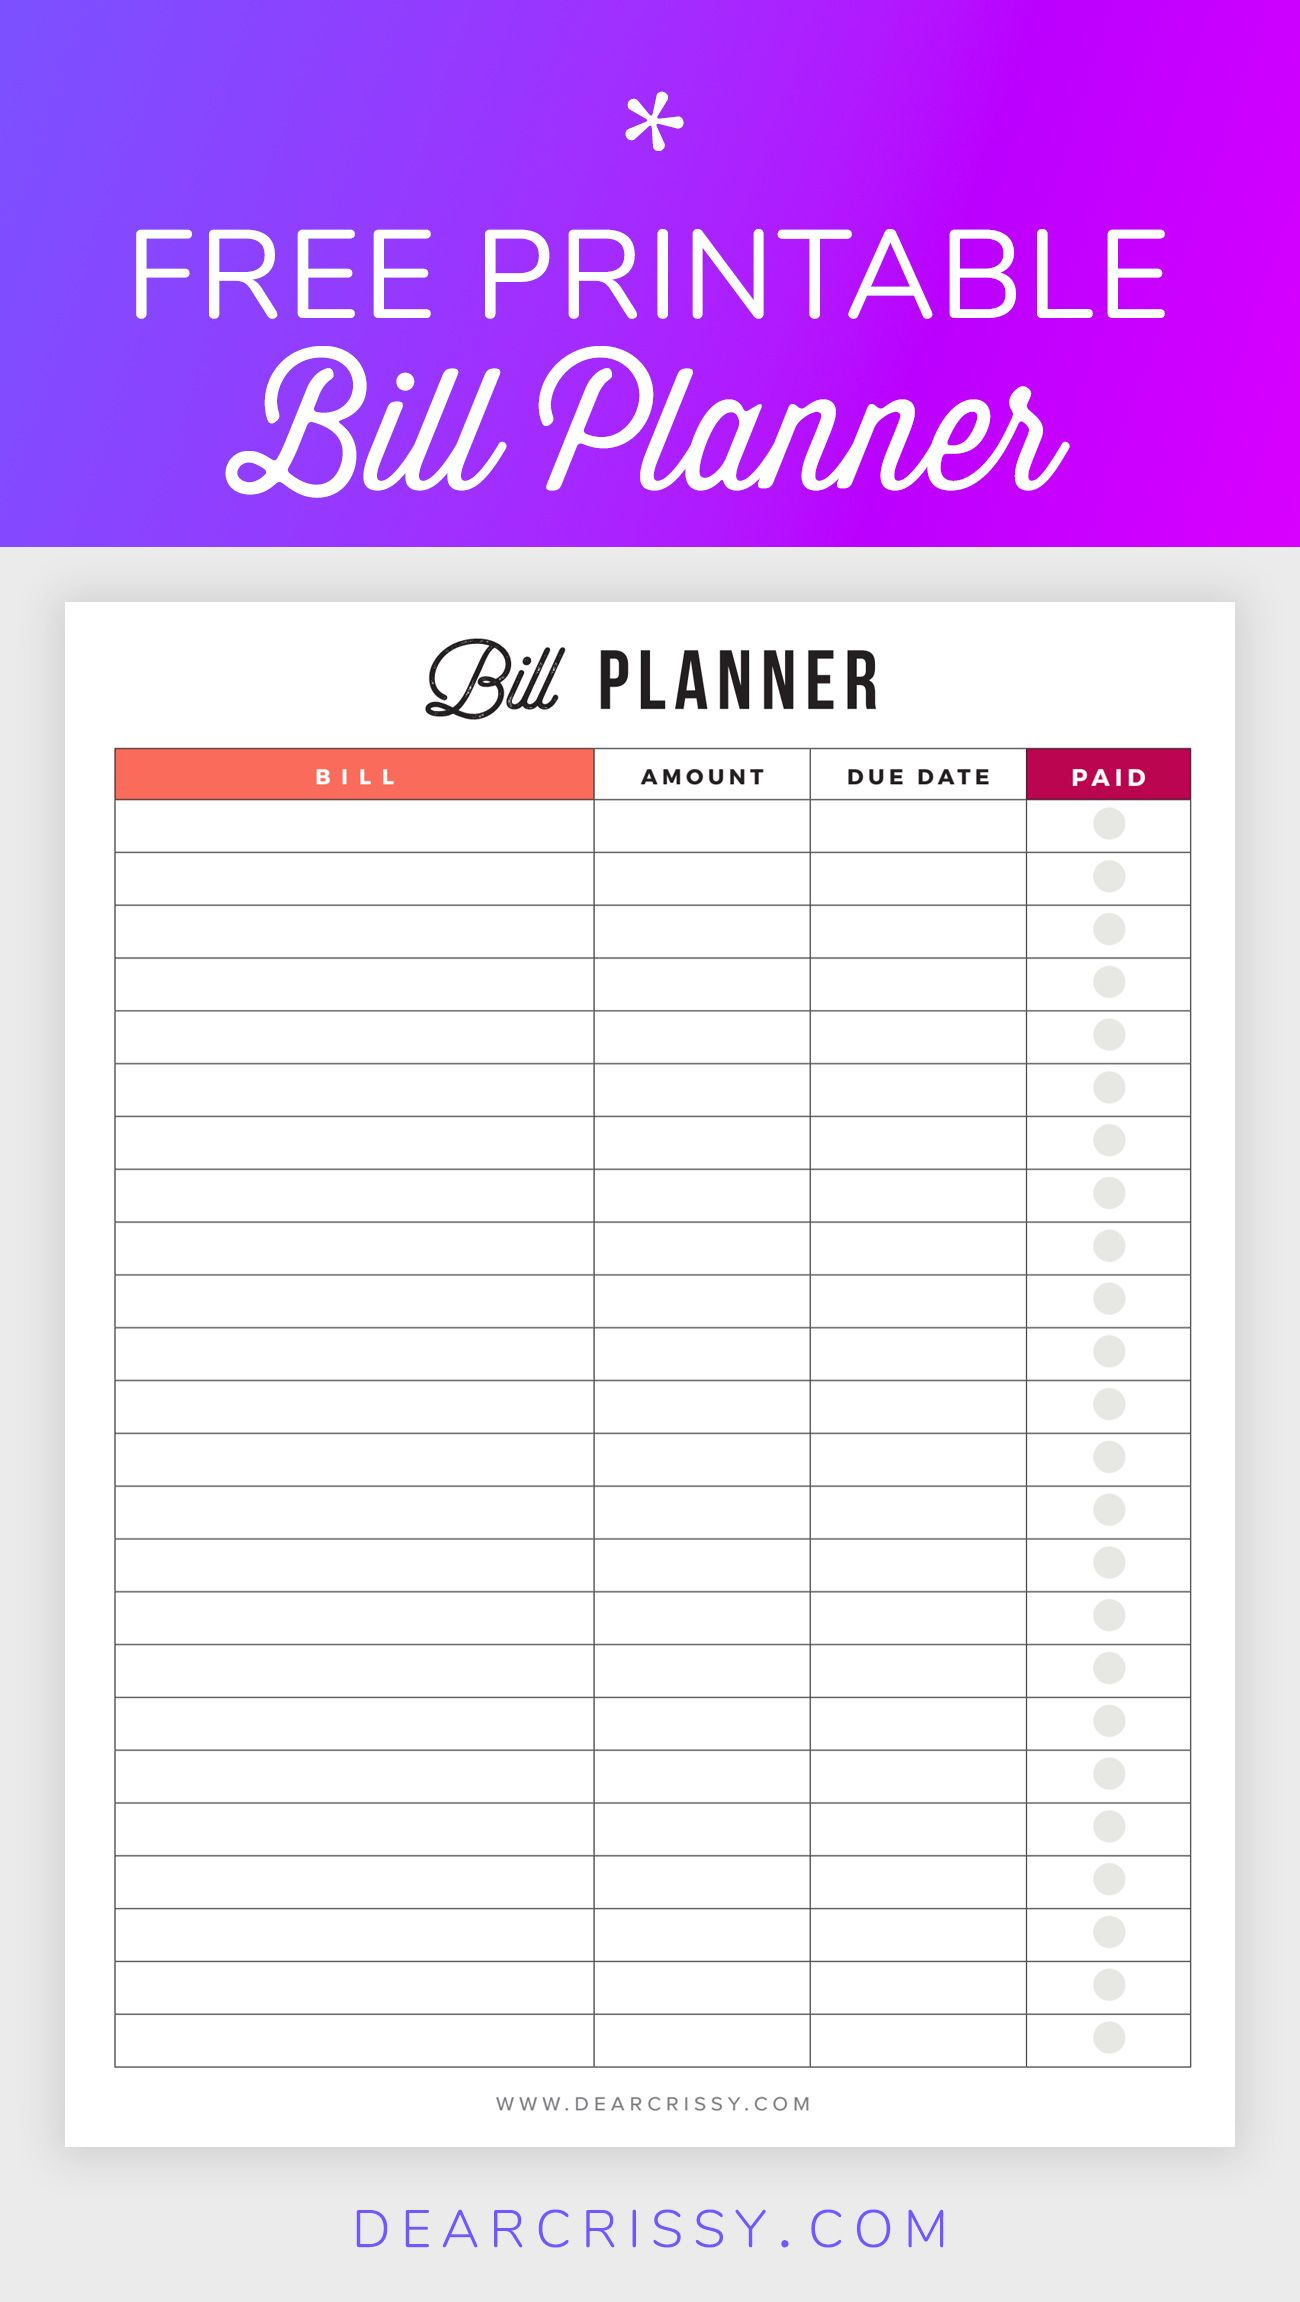 Bill Planner Printable - Pay Down Your Bills This Year! | Organizing - Free Printable Bill Tracker